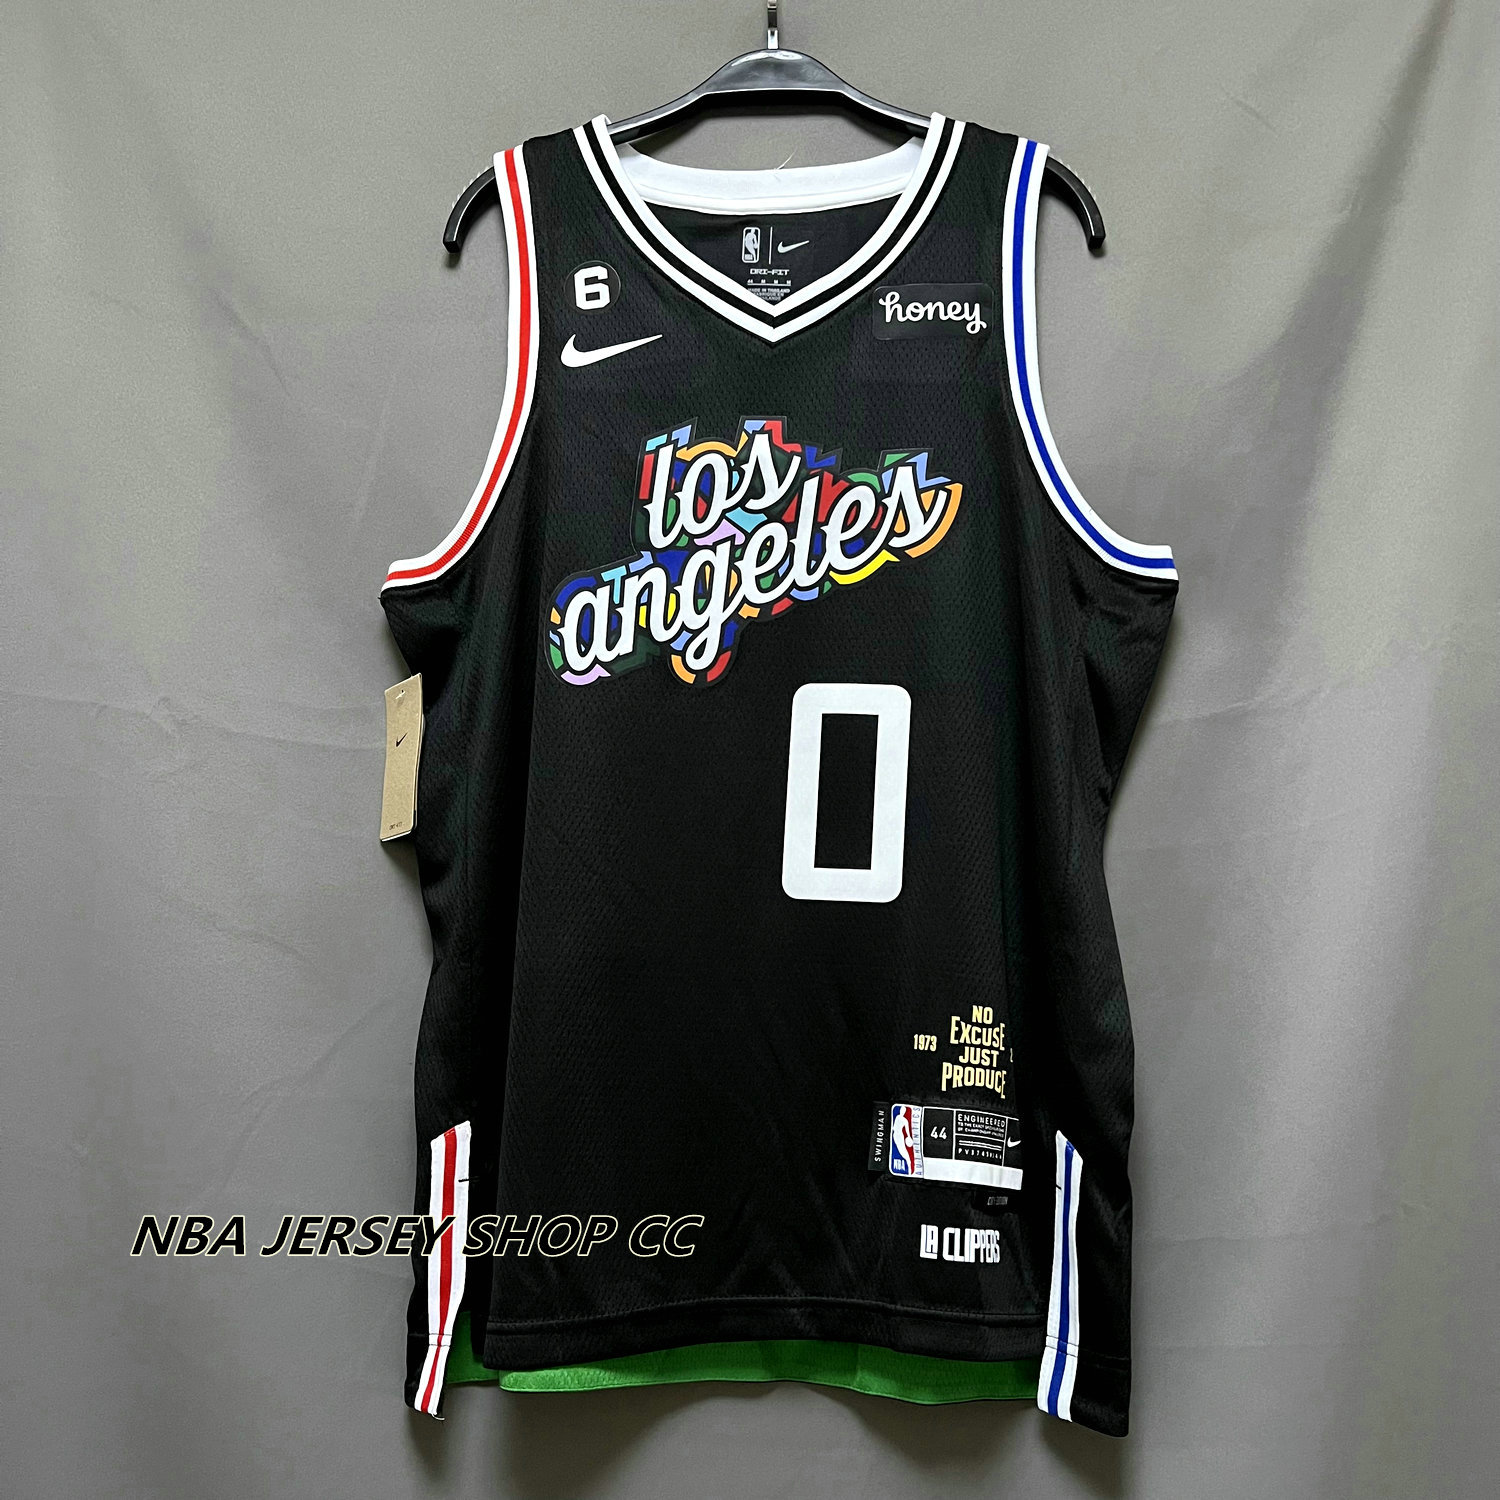 Los Angeles Clippers City Edition Jersey  Jersey, Los angeles clippers, Paul  george